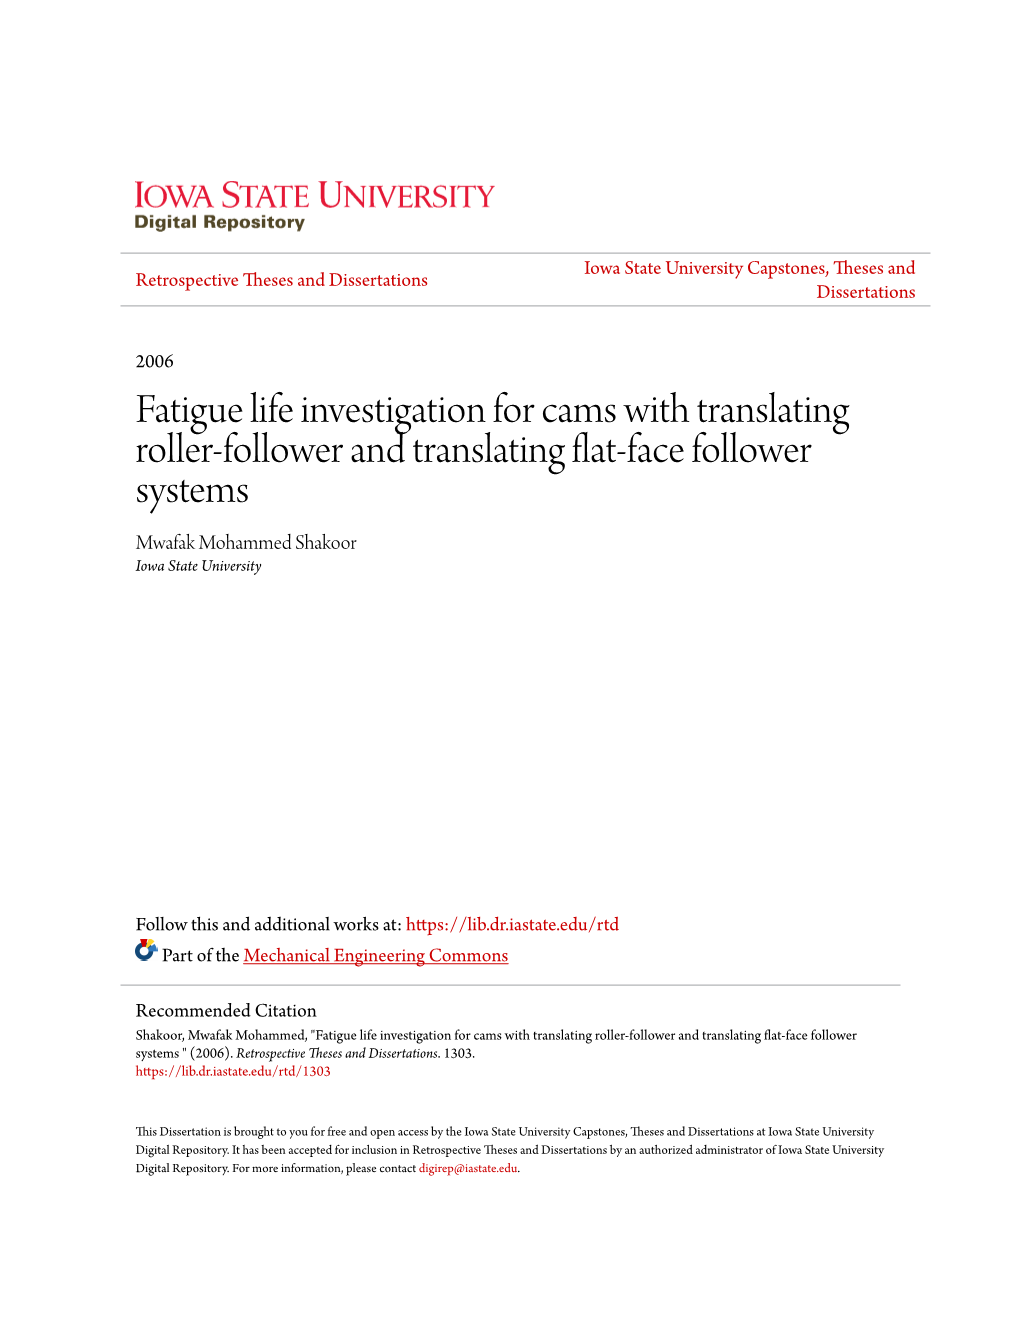 Fatigue Life Investigation for Cams with Translating Roller-Follower and Translating Flat-Face Follower Systems Mwafak Mohammed Shakoor Iowa State University